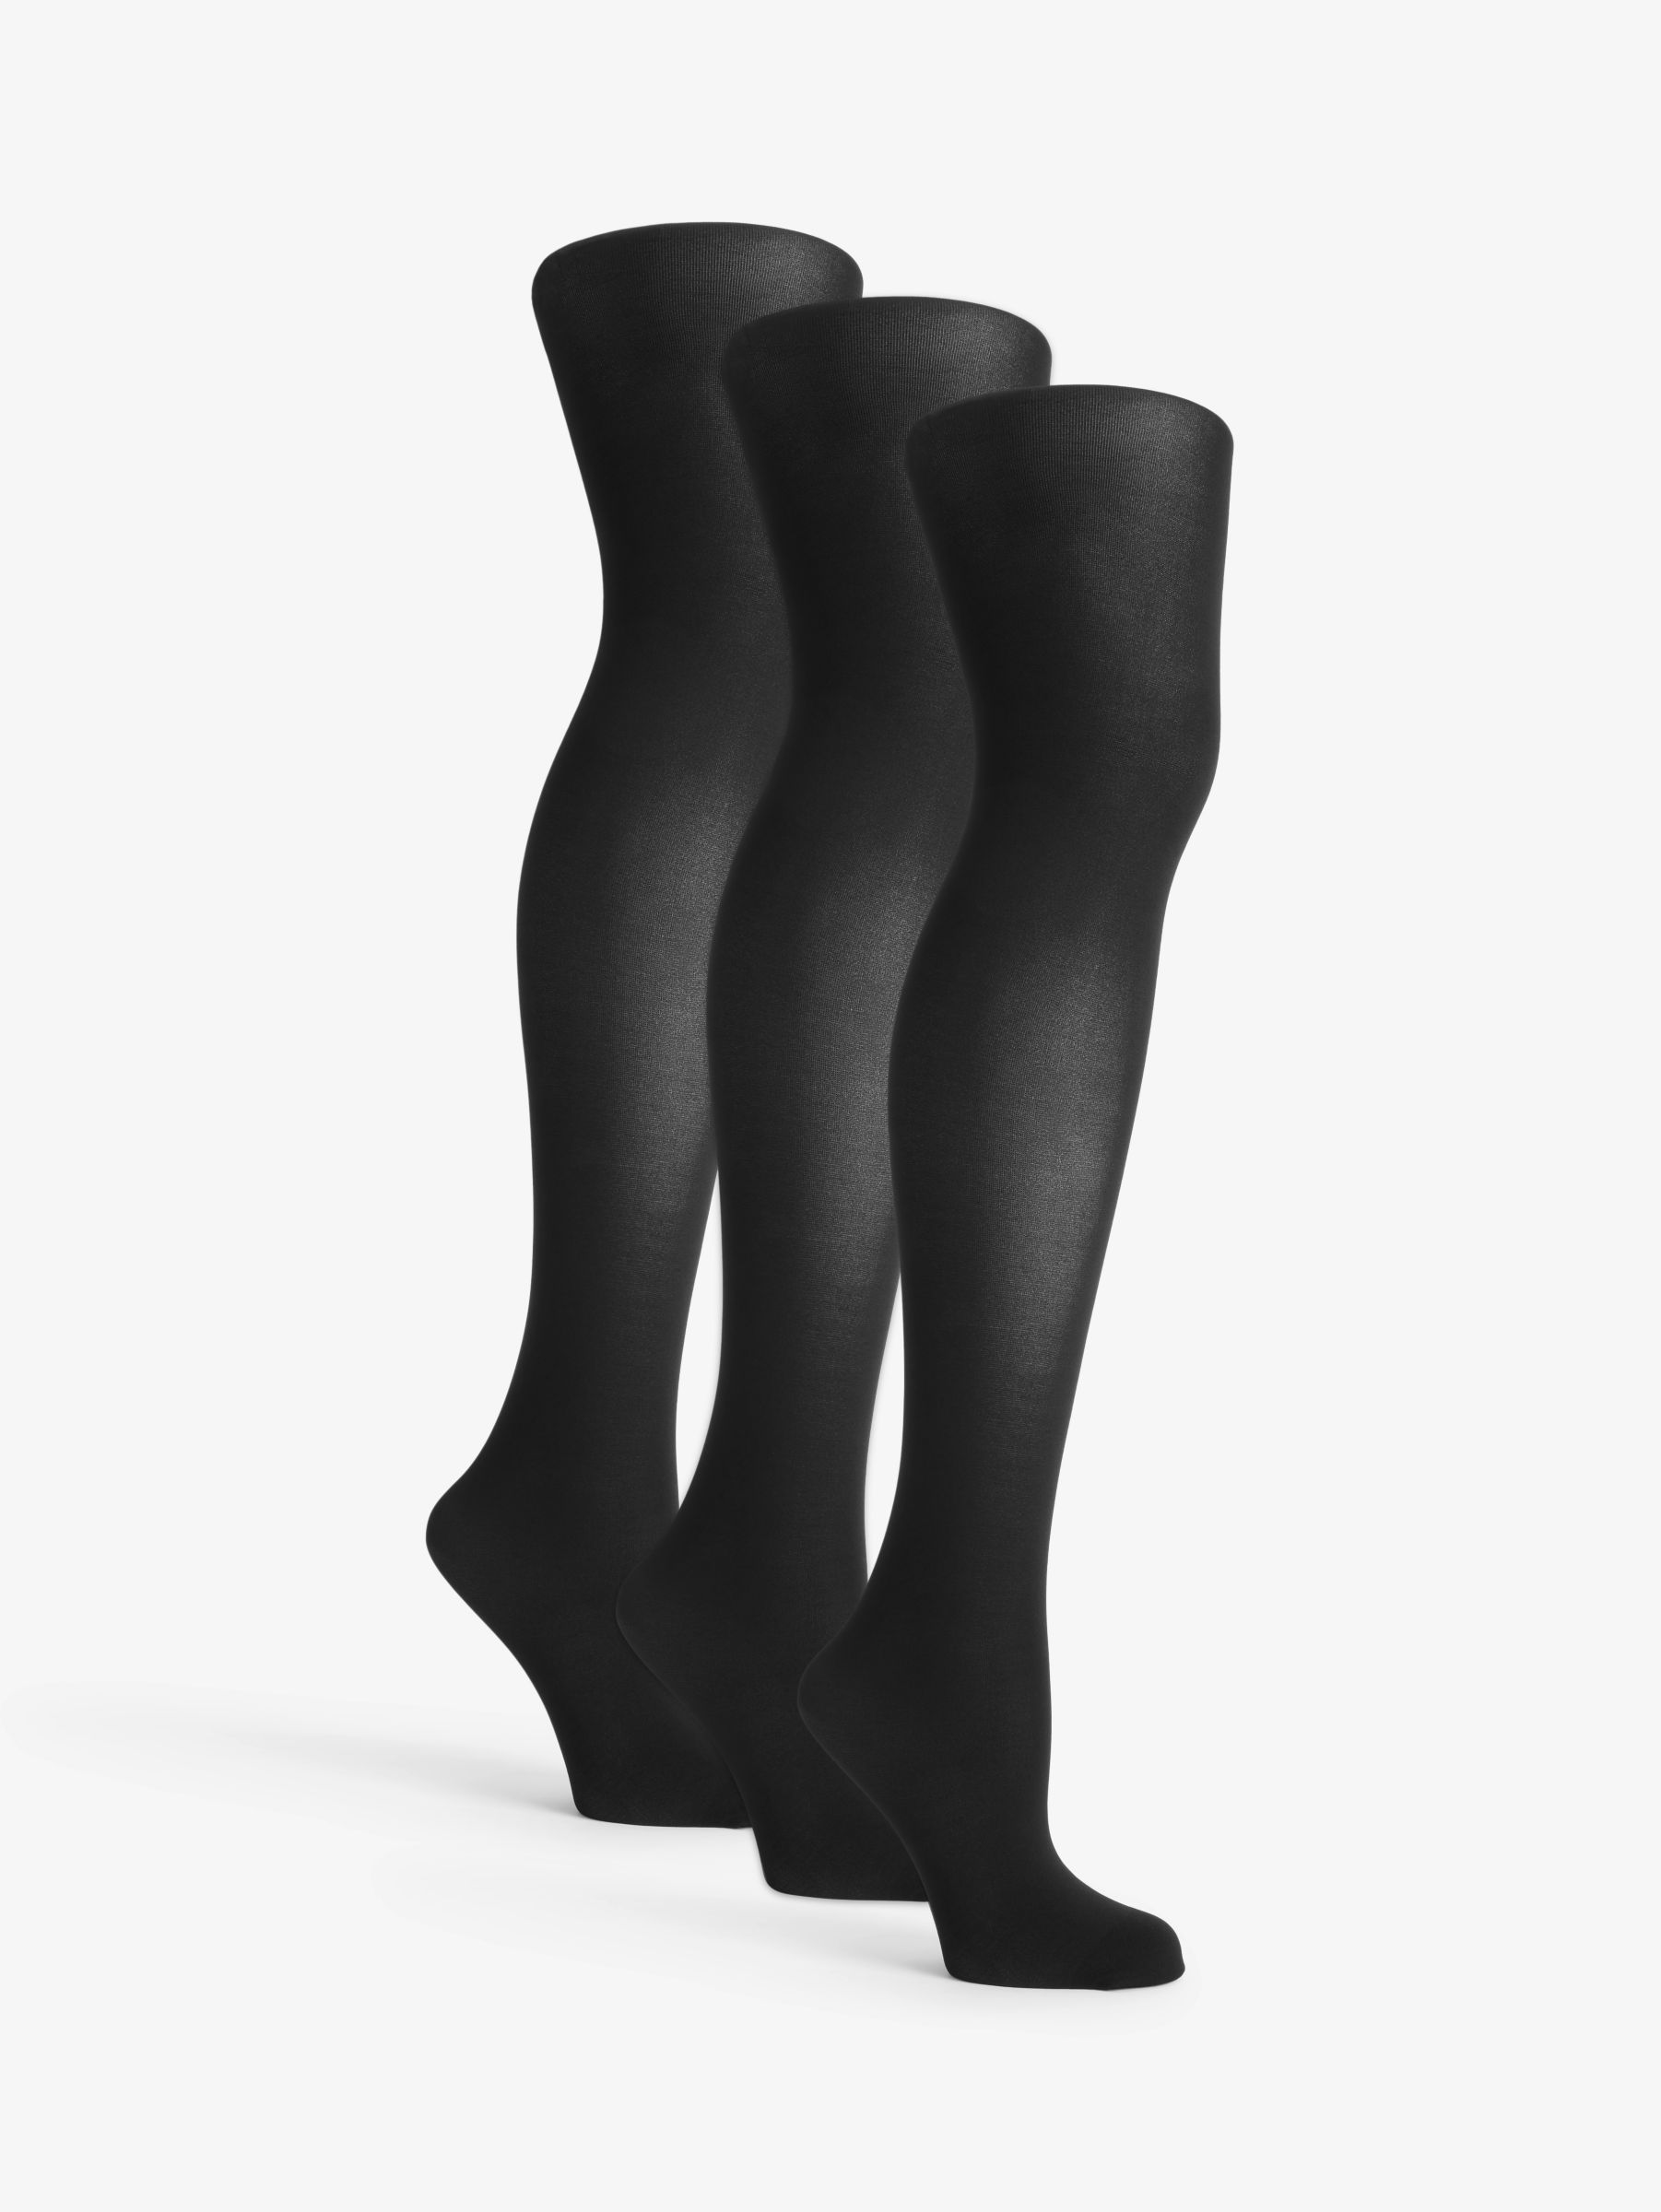 John Lewis ANYDAY 40 Denier Opaque Tights, Pack of 3, Black, S